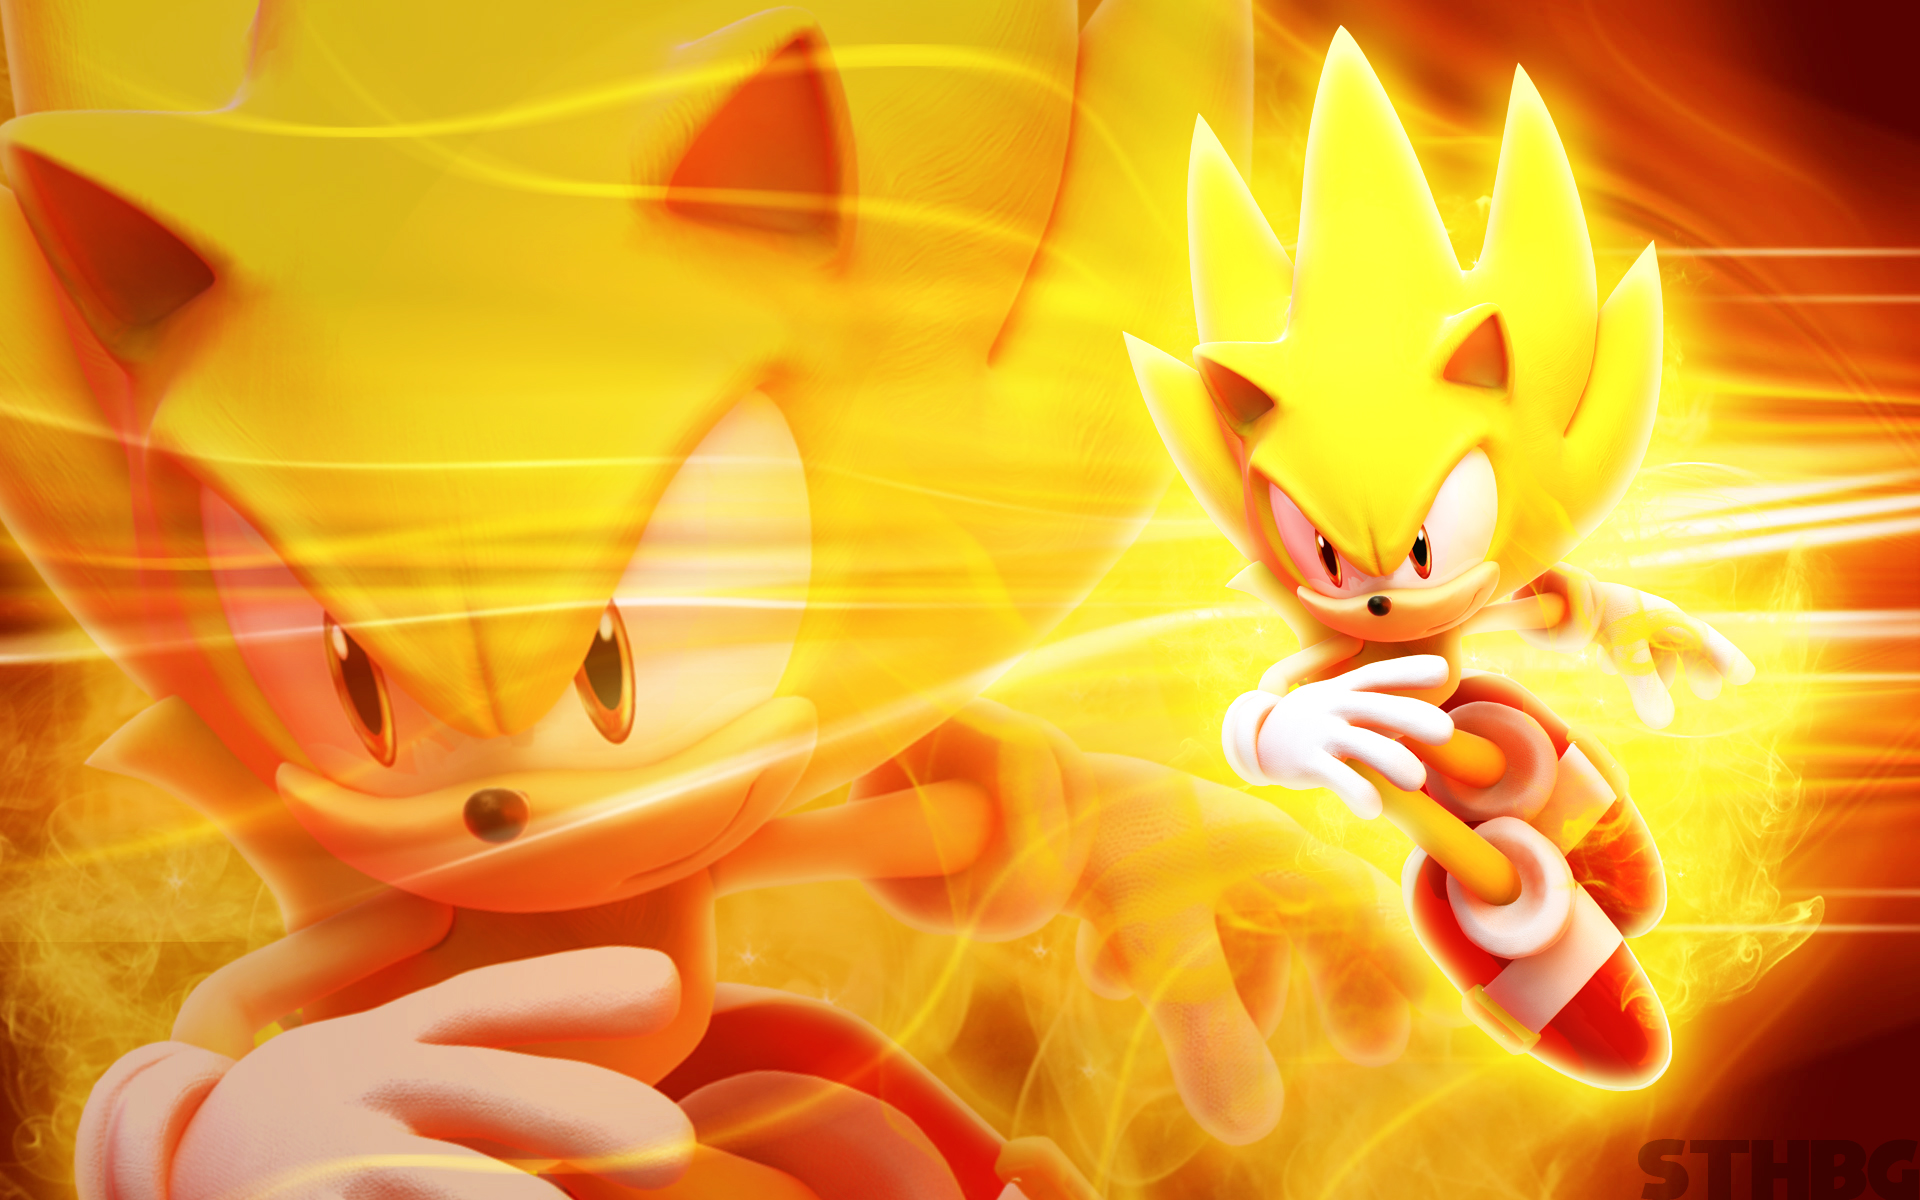 SEGA HARDlight on X: Power up your phones and shine bright with an all-new  wallpaper!✨There's still time to unlock and earn cards for brand new  Runner, Super Sonic, in #SonicForces Mobile. #Sonic30th